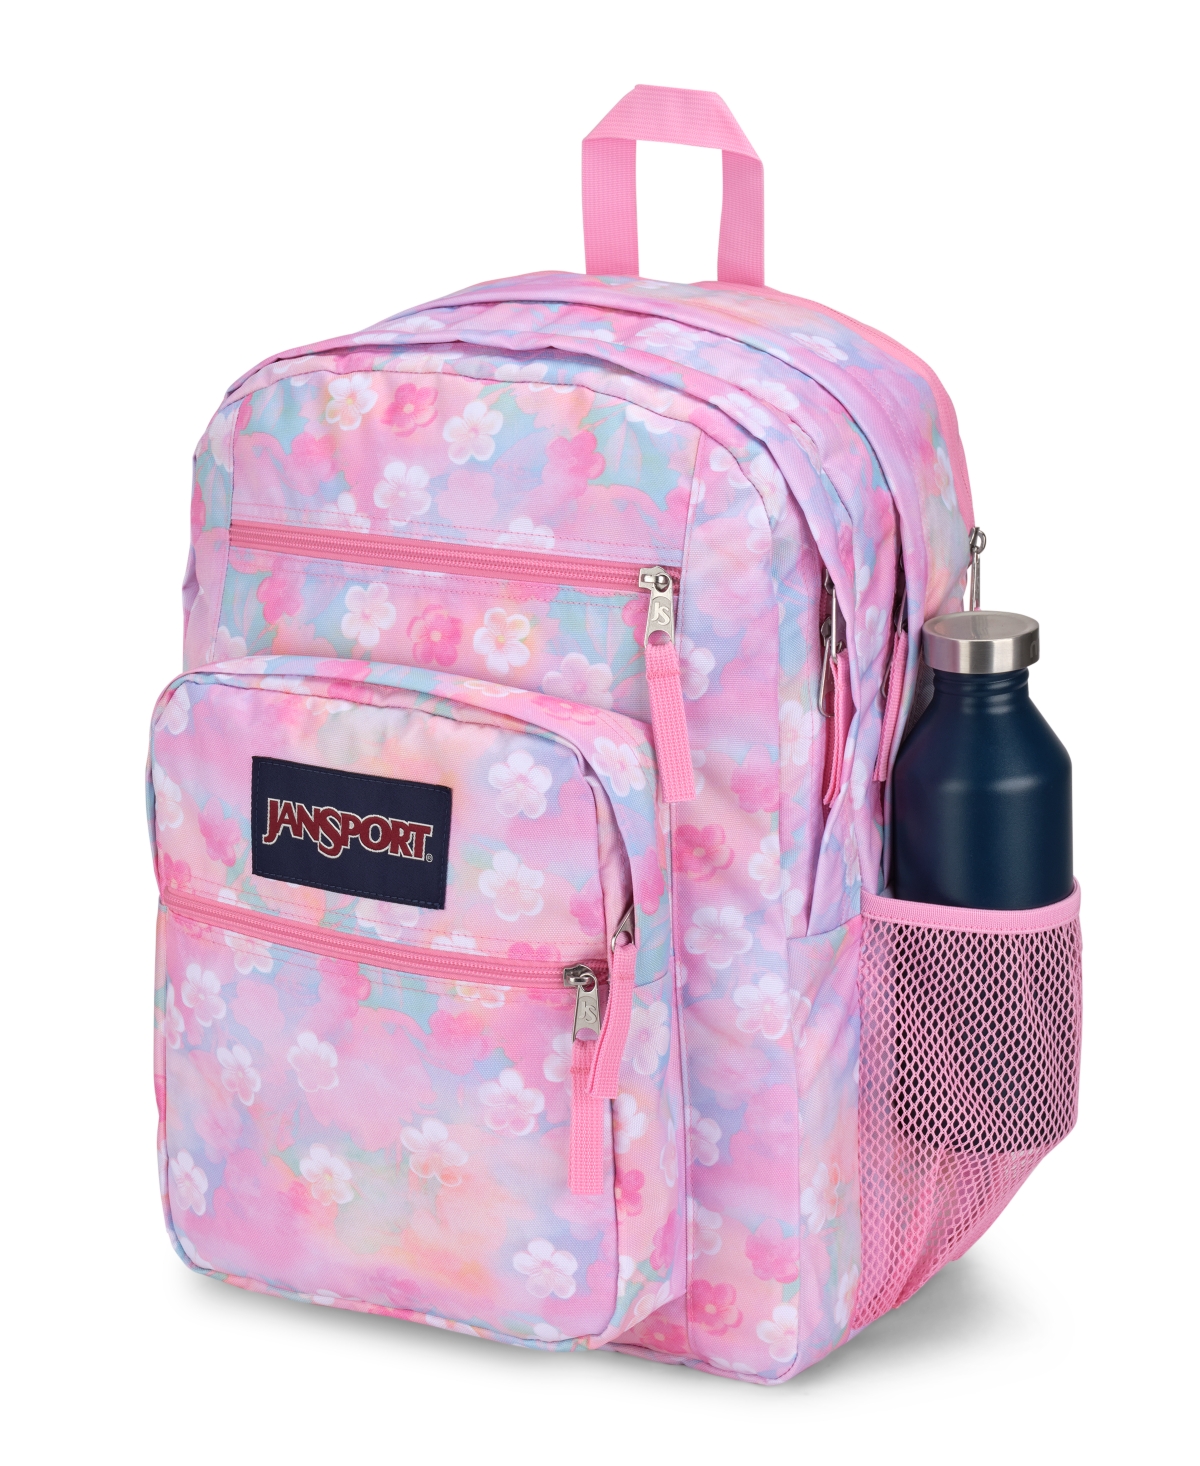 Jansport Big Student Backpack In Neon Daisy